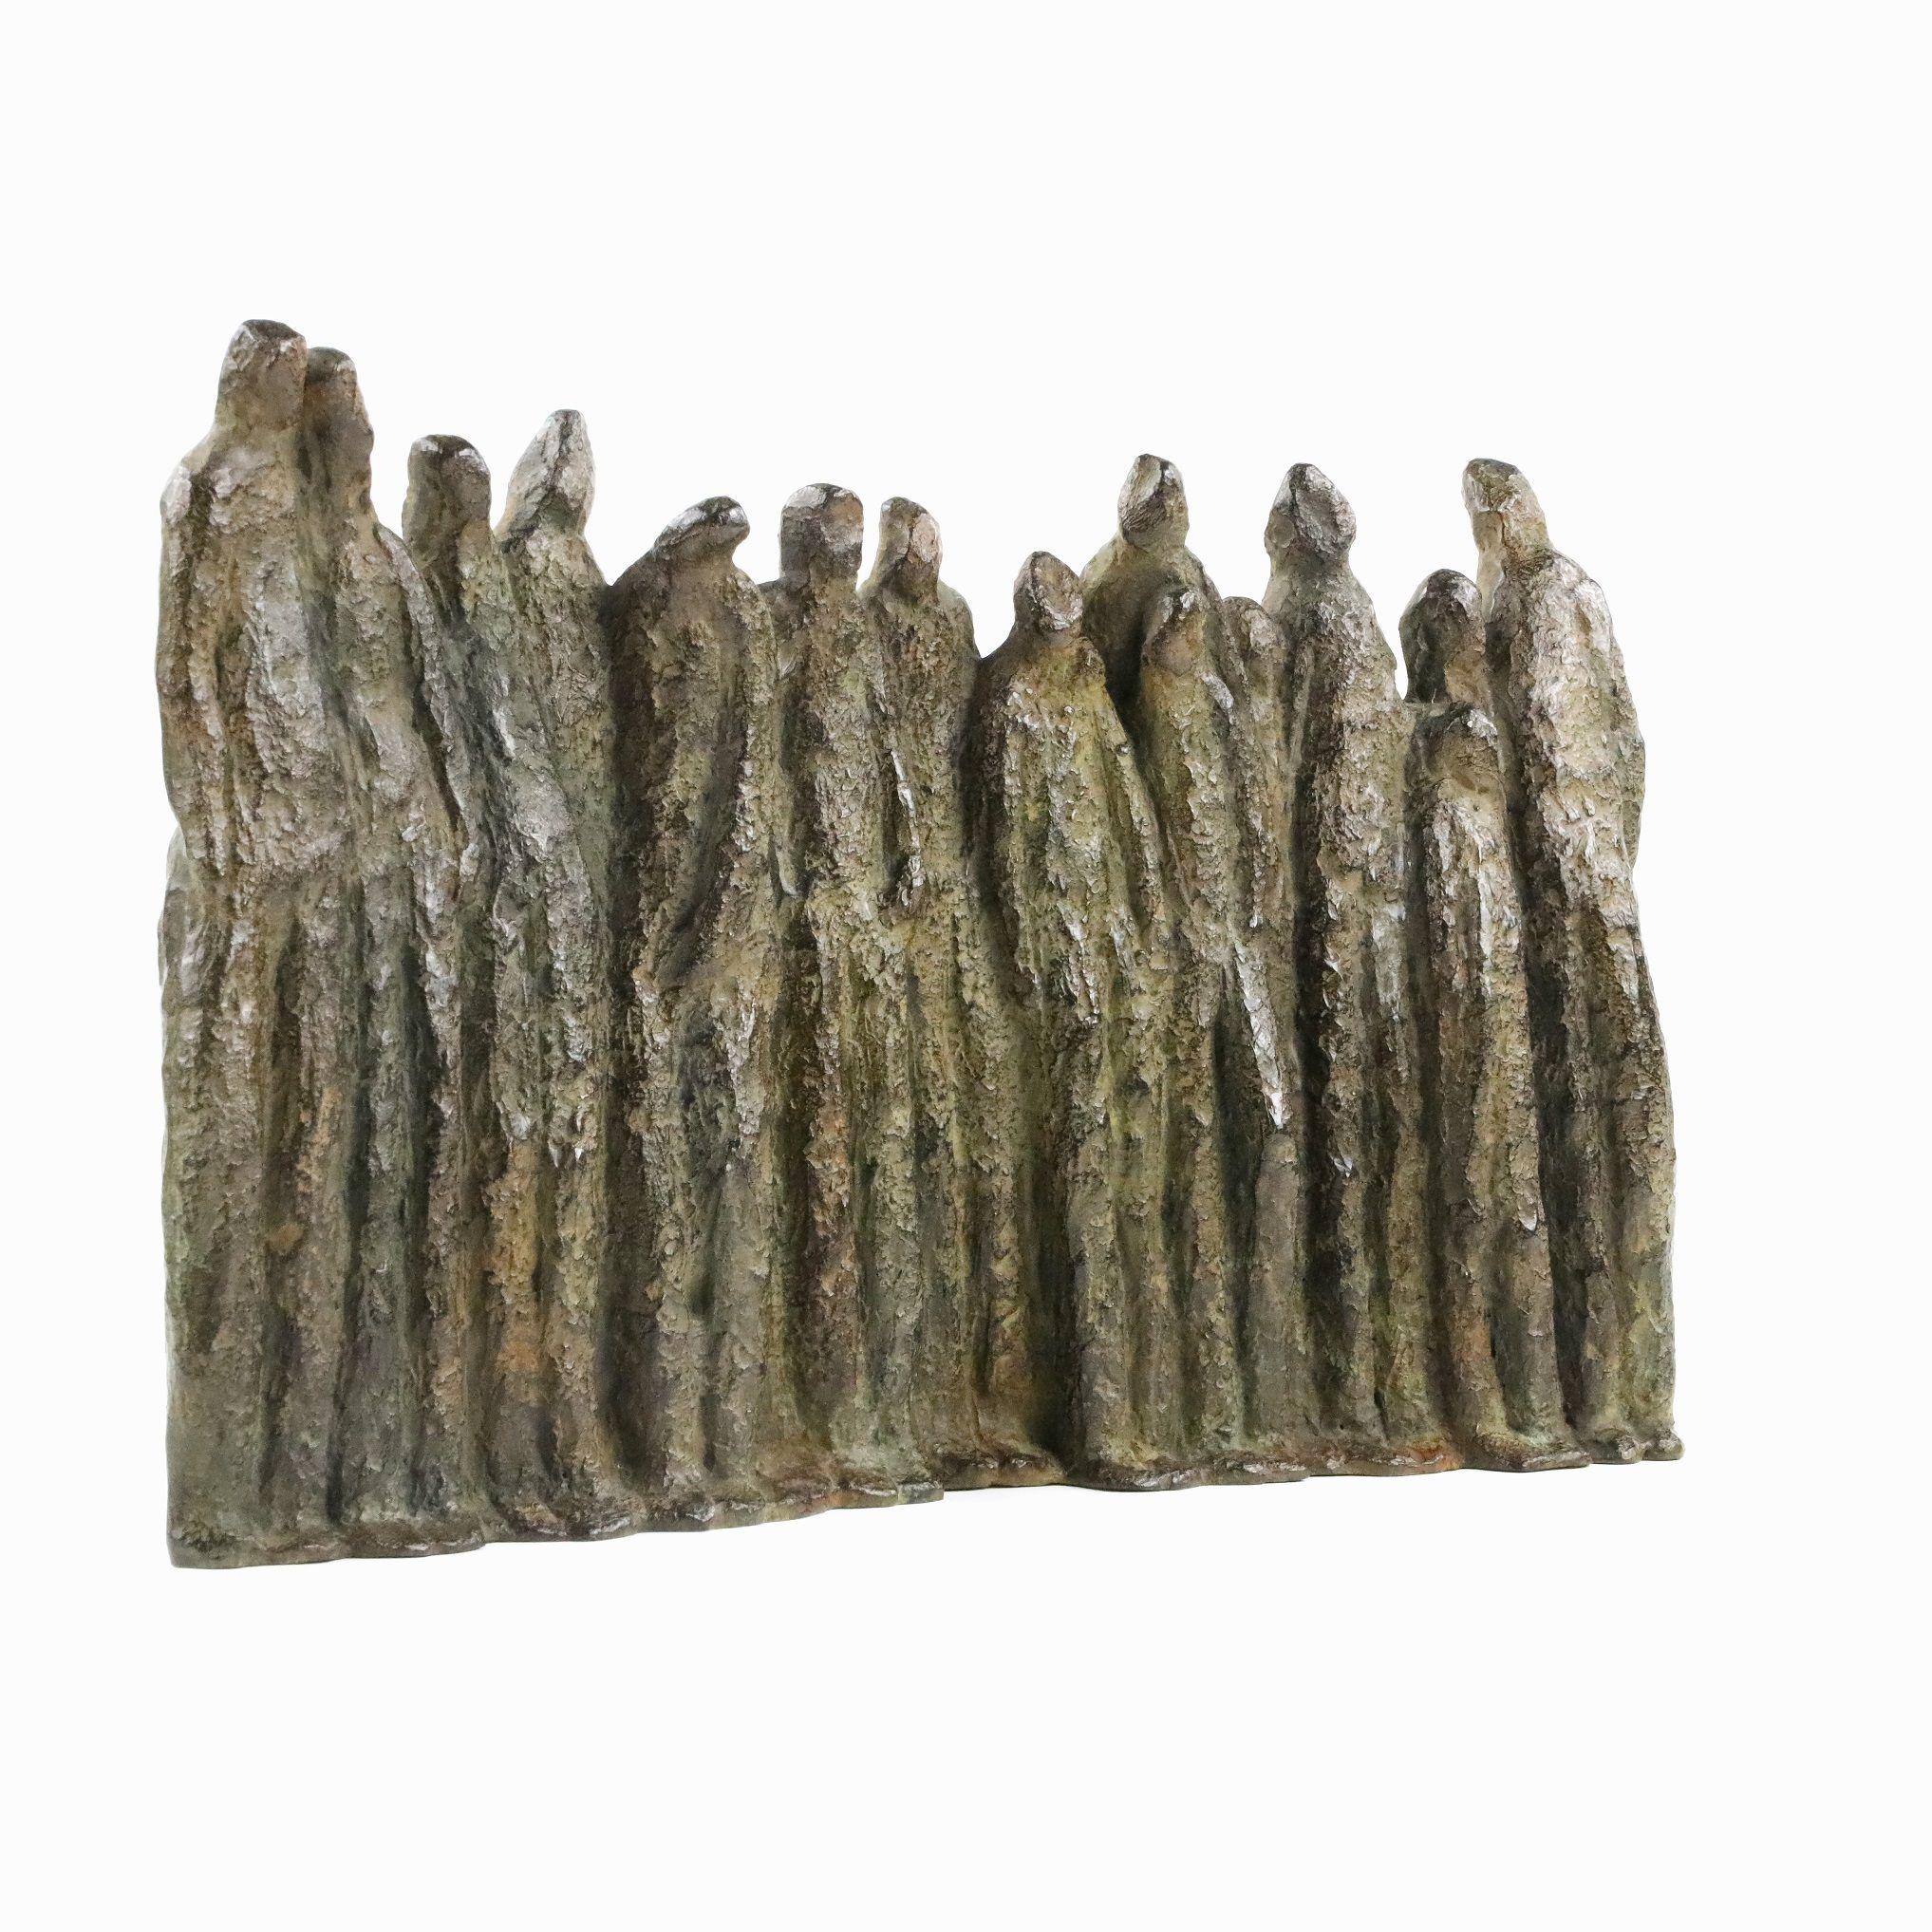 Group II by Delphine Brabant - Figurative bronze sculpture, human silhouettes  For Sale 2